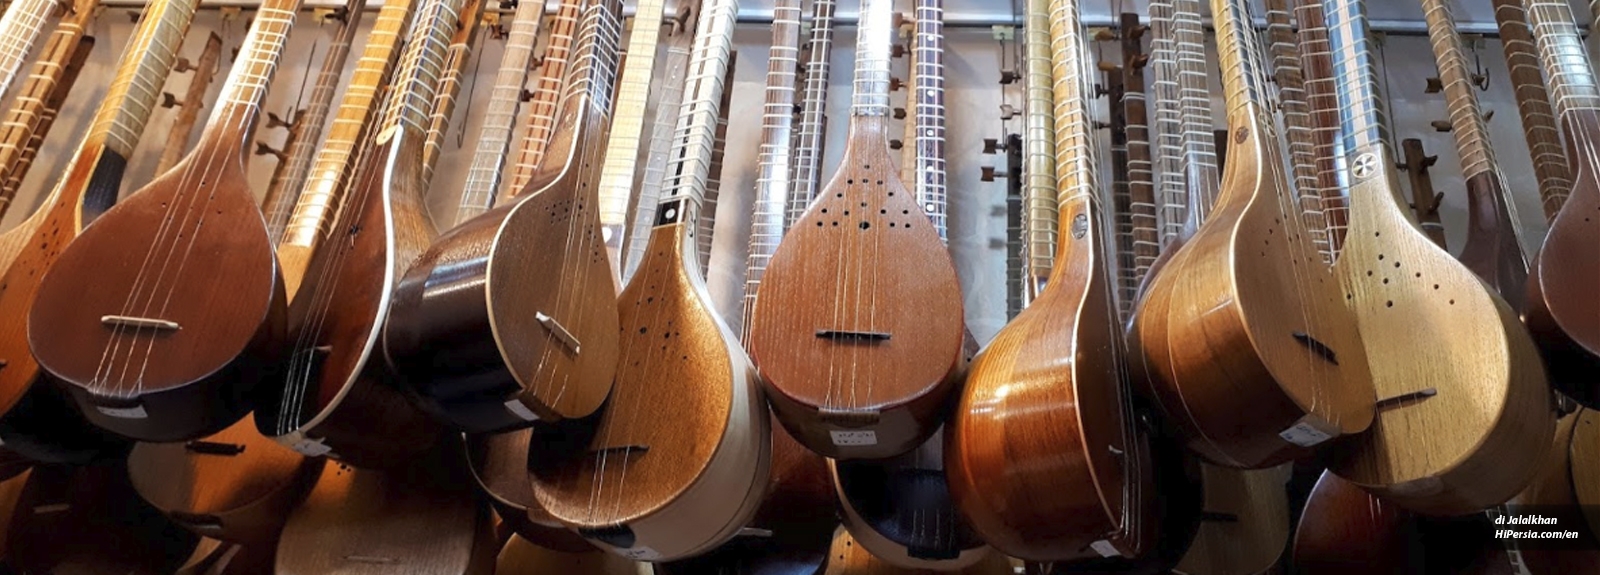 Musical Instruments shopping centers in Tehran